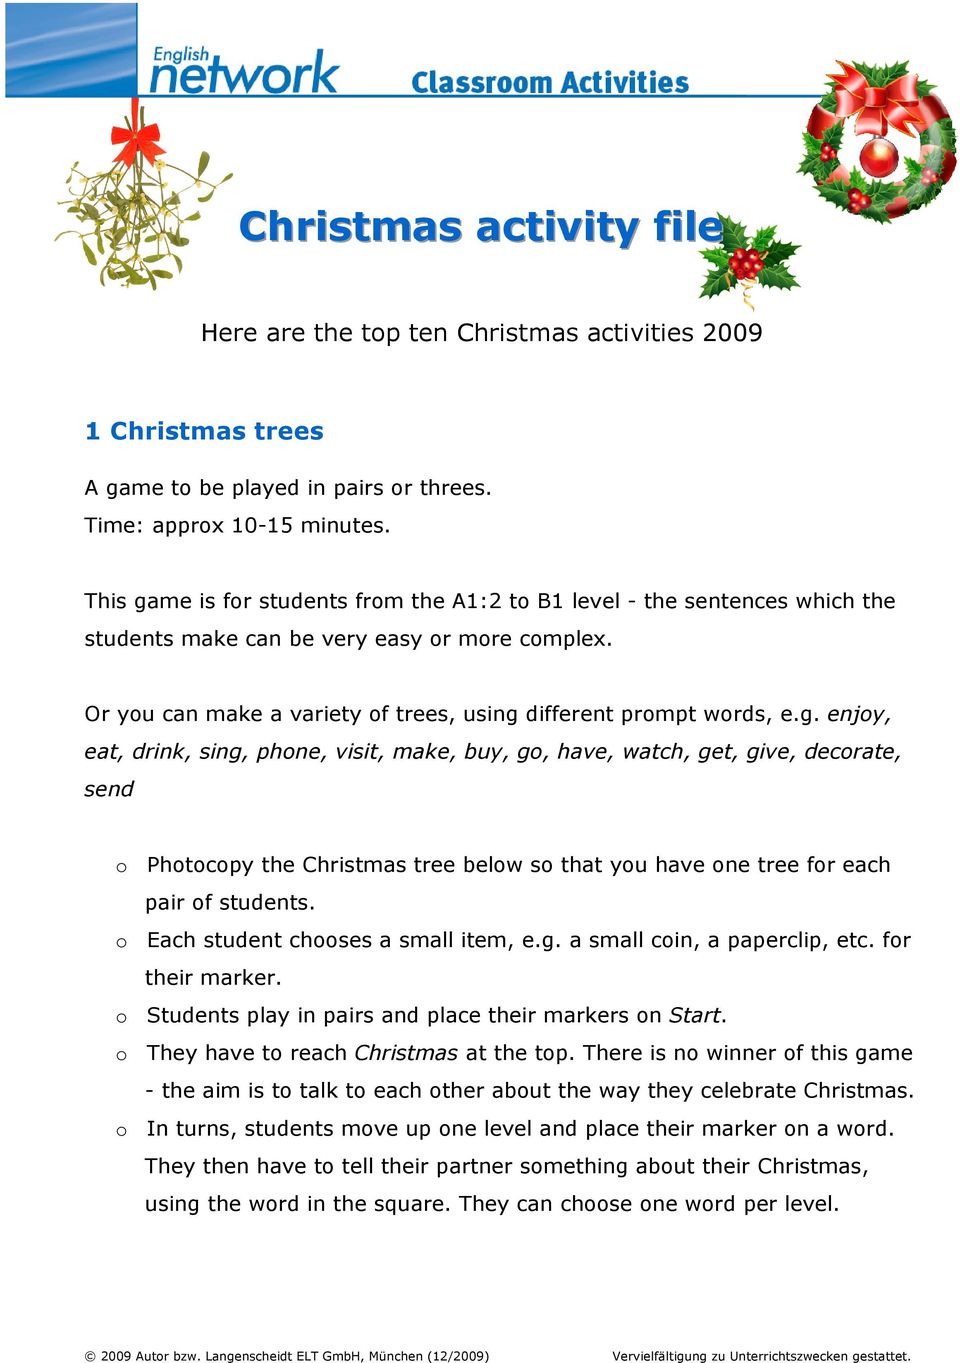 o Each student chooses a small item, e.g. a small coin, a paperclip, etc. for their marker. o Students play in pairs and place their markers on Start. o They have to reach Christmas at the top.